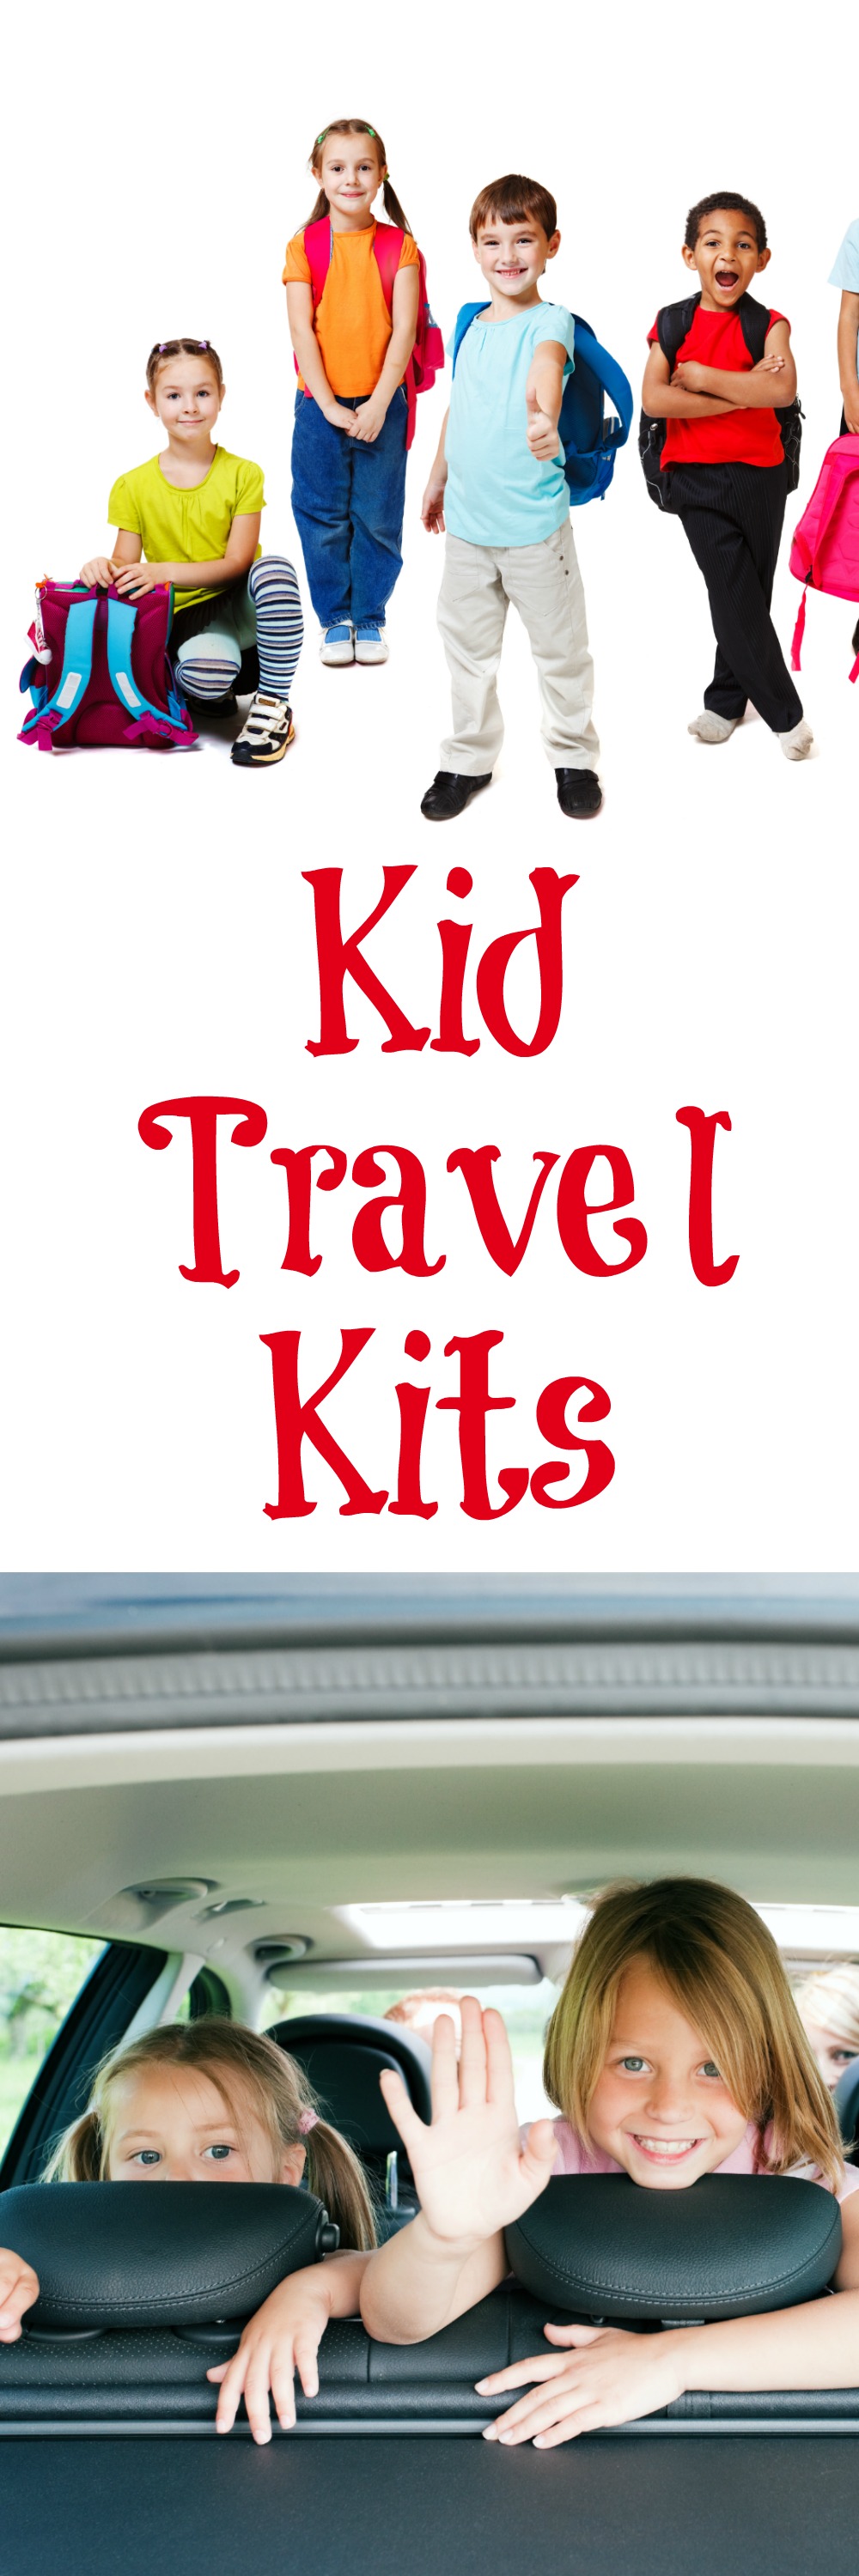 Kid Travel Kits--Planning on hitting the road this summer? Make sure to pack some Kid Travel Kits to make the trip easier!